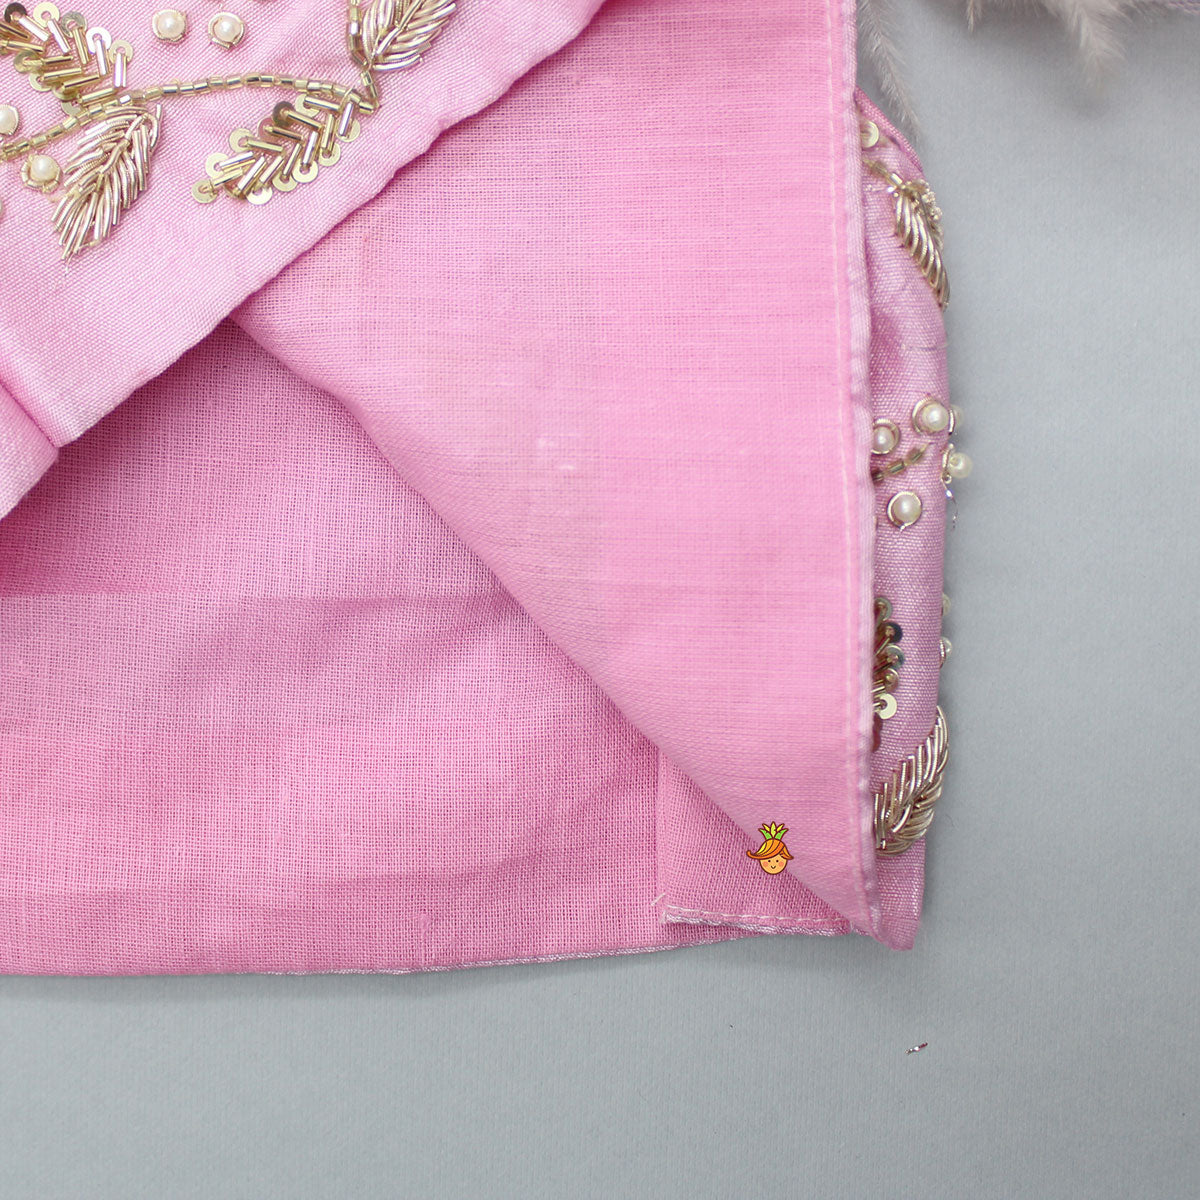 Zardozi Embroidered Light Pink Top And Double Layered Lehenga With Dupatta And Pleated Head Band